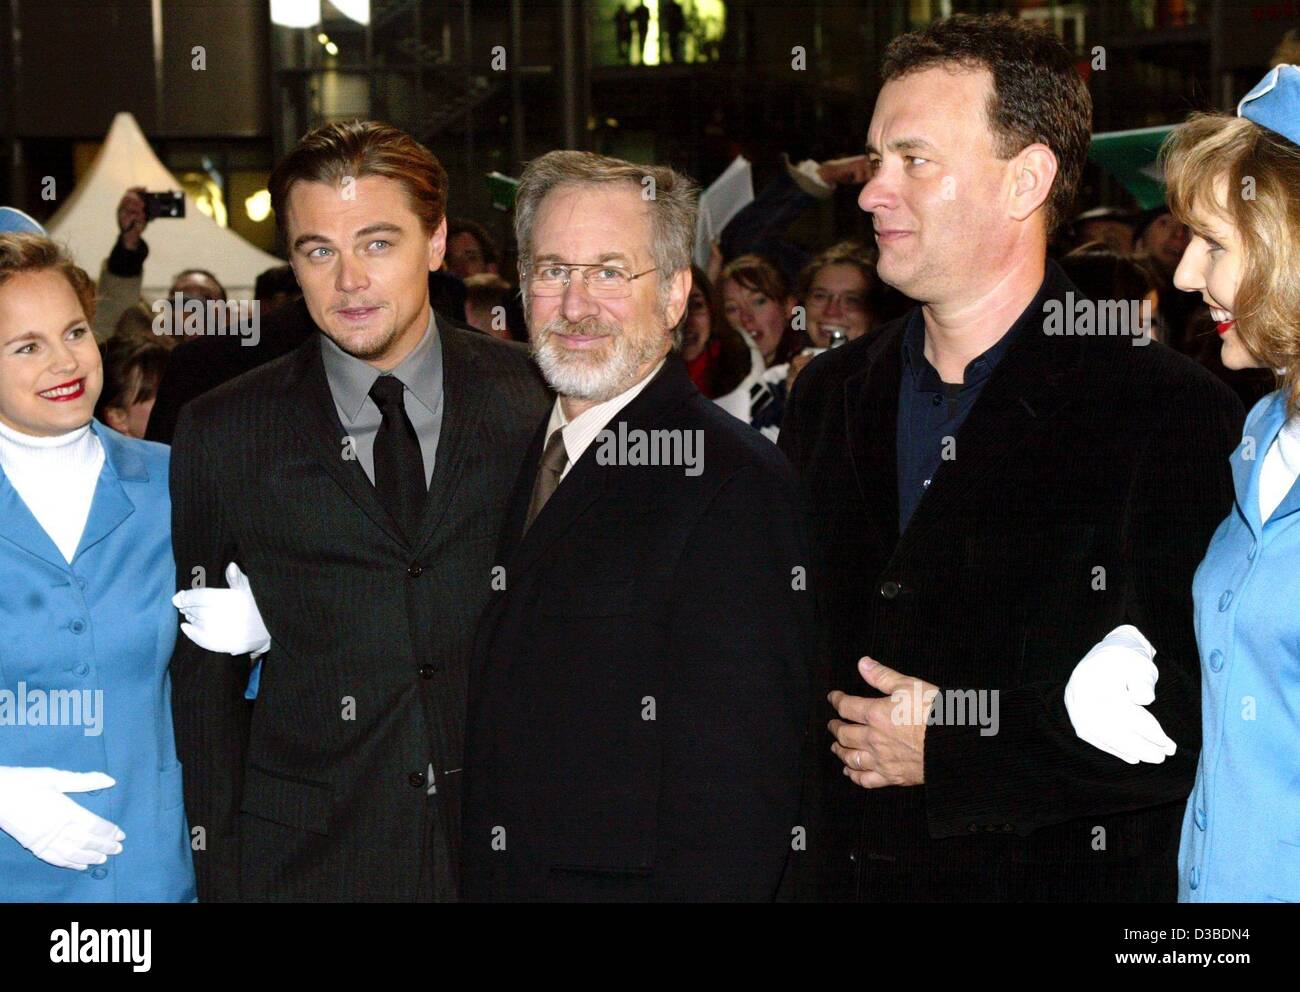 (dpa) - US actors Leonardo DiCaprio (L) and Tom Hanks (R) pose with their director Steven Spielberg (C) and hostesses ahead of the German premiere of their new film 'Catch Me If You Can' in Berlin, 26 January 2003. The film, based on a true story, is about a successful con artist (DiCaprio) who mana Stock Photo